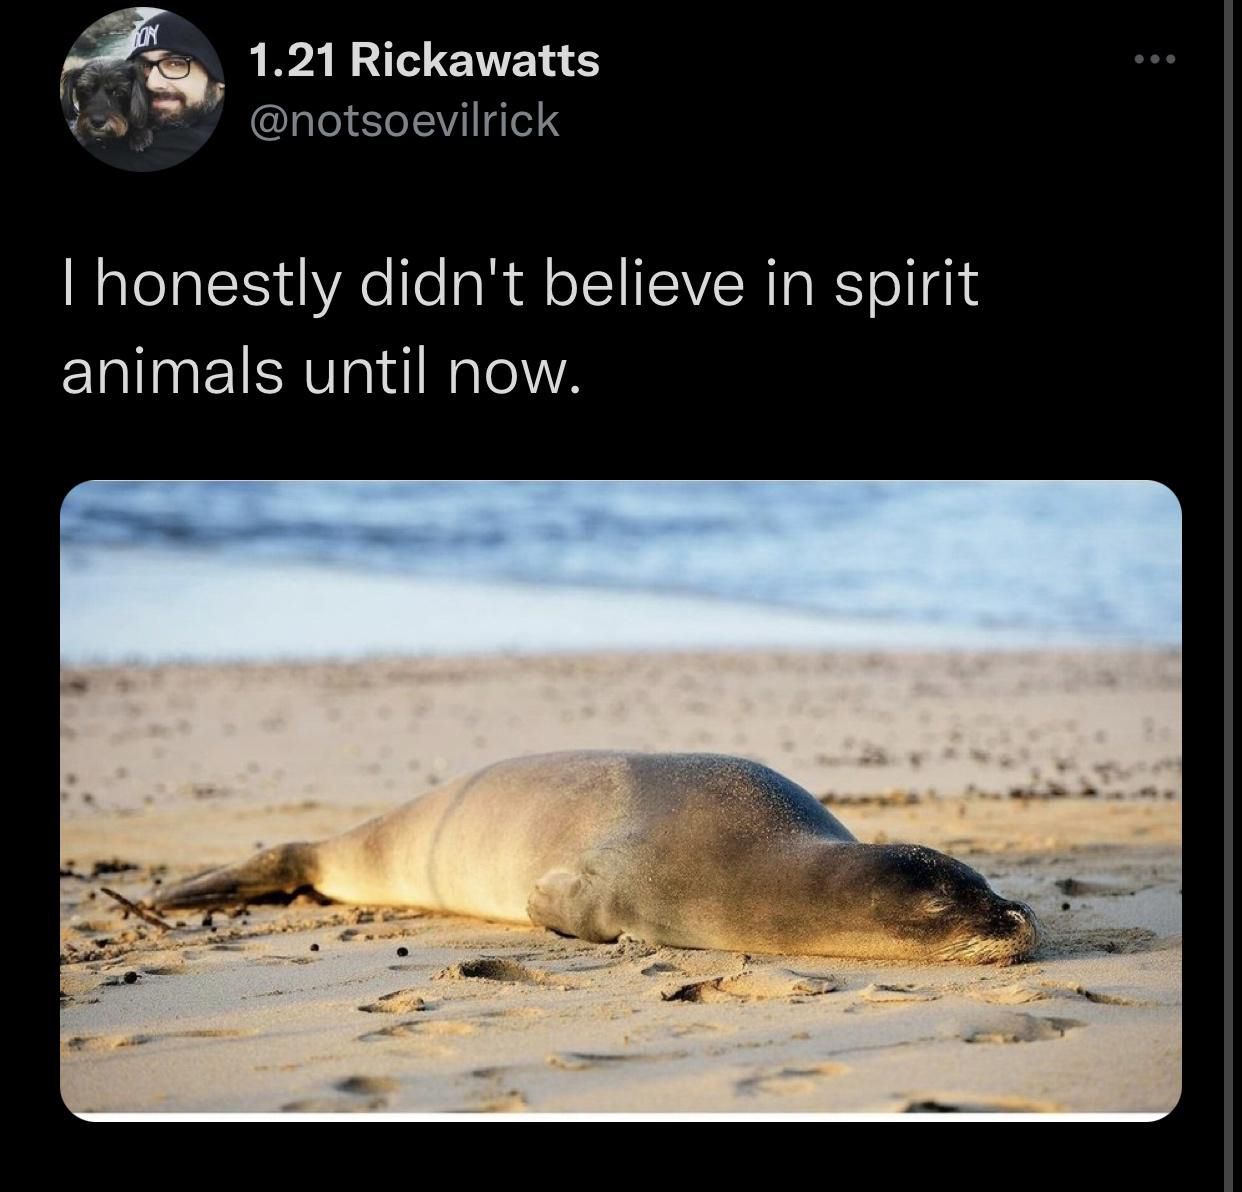 monday morning randomness - fauna - Try 1.21 Rickawatts I honestly didn't believe in spirit animals until now.